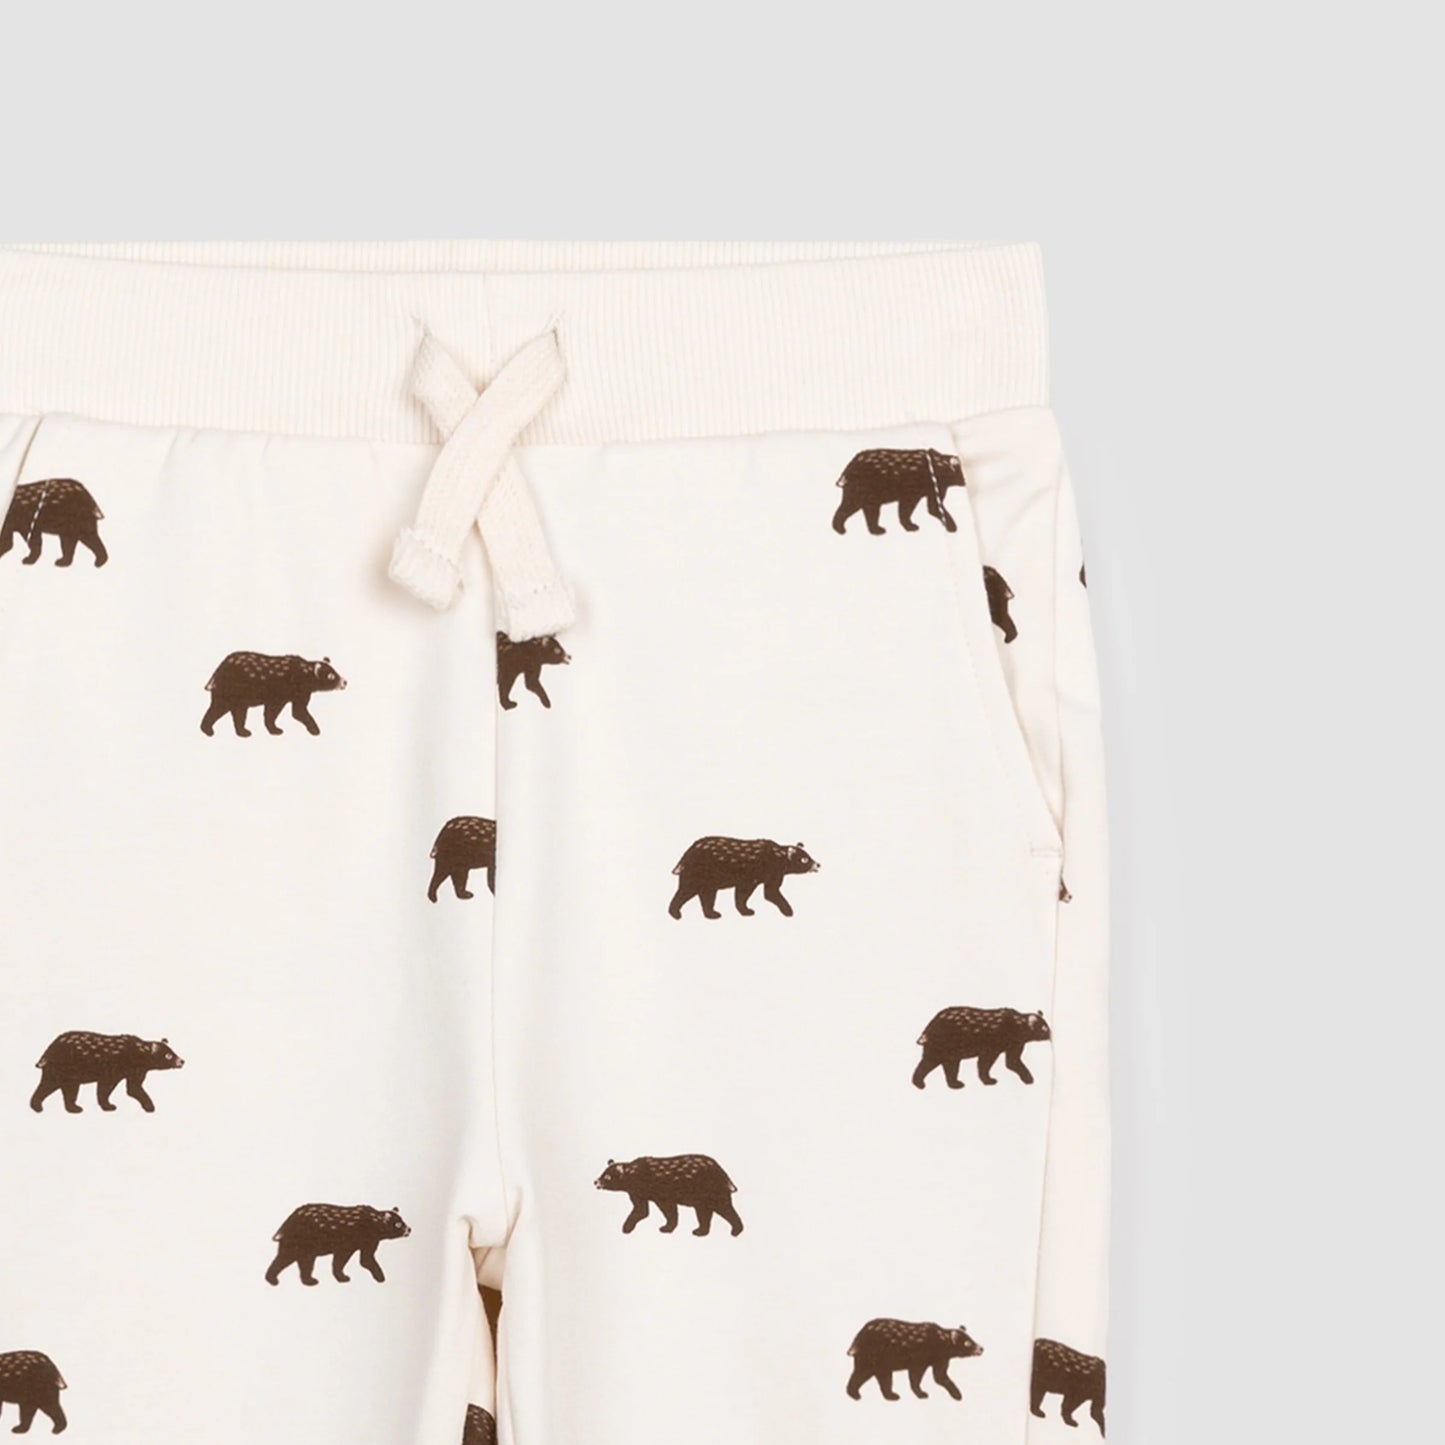 Baby Grizzly Print on Crème Baby Joggers